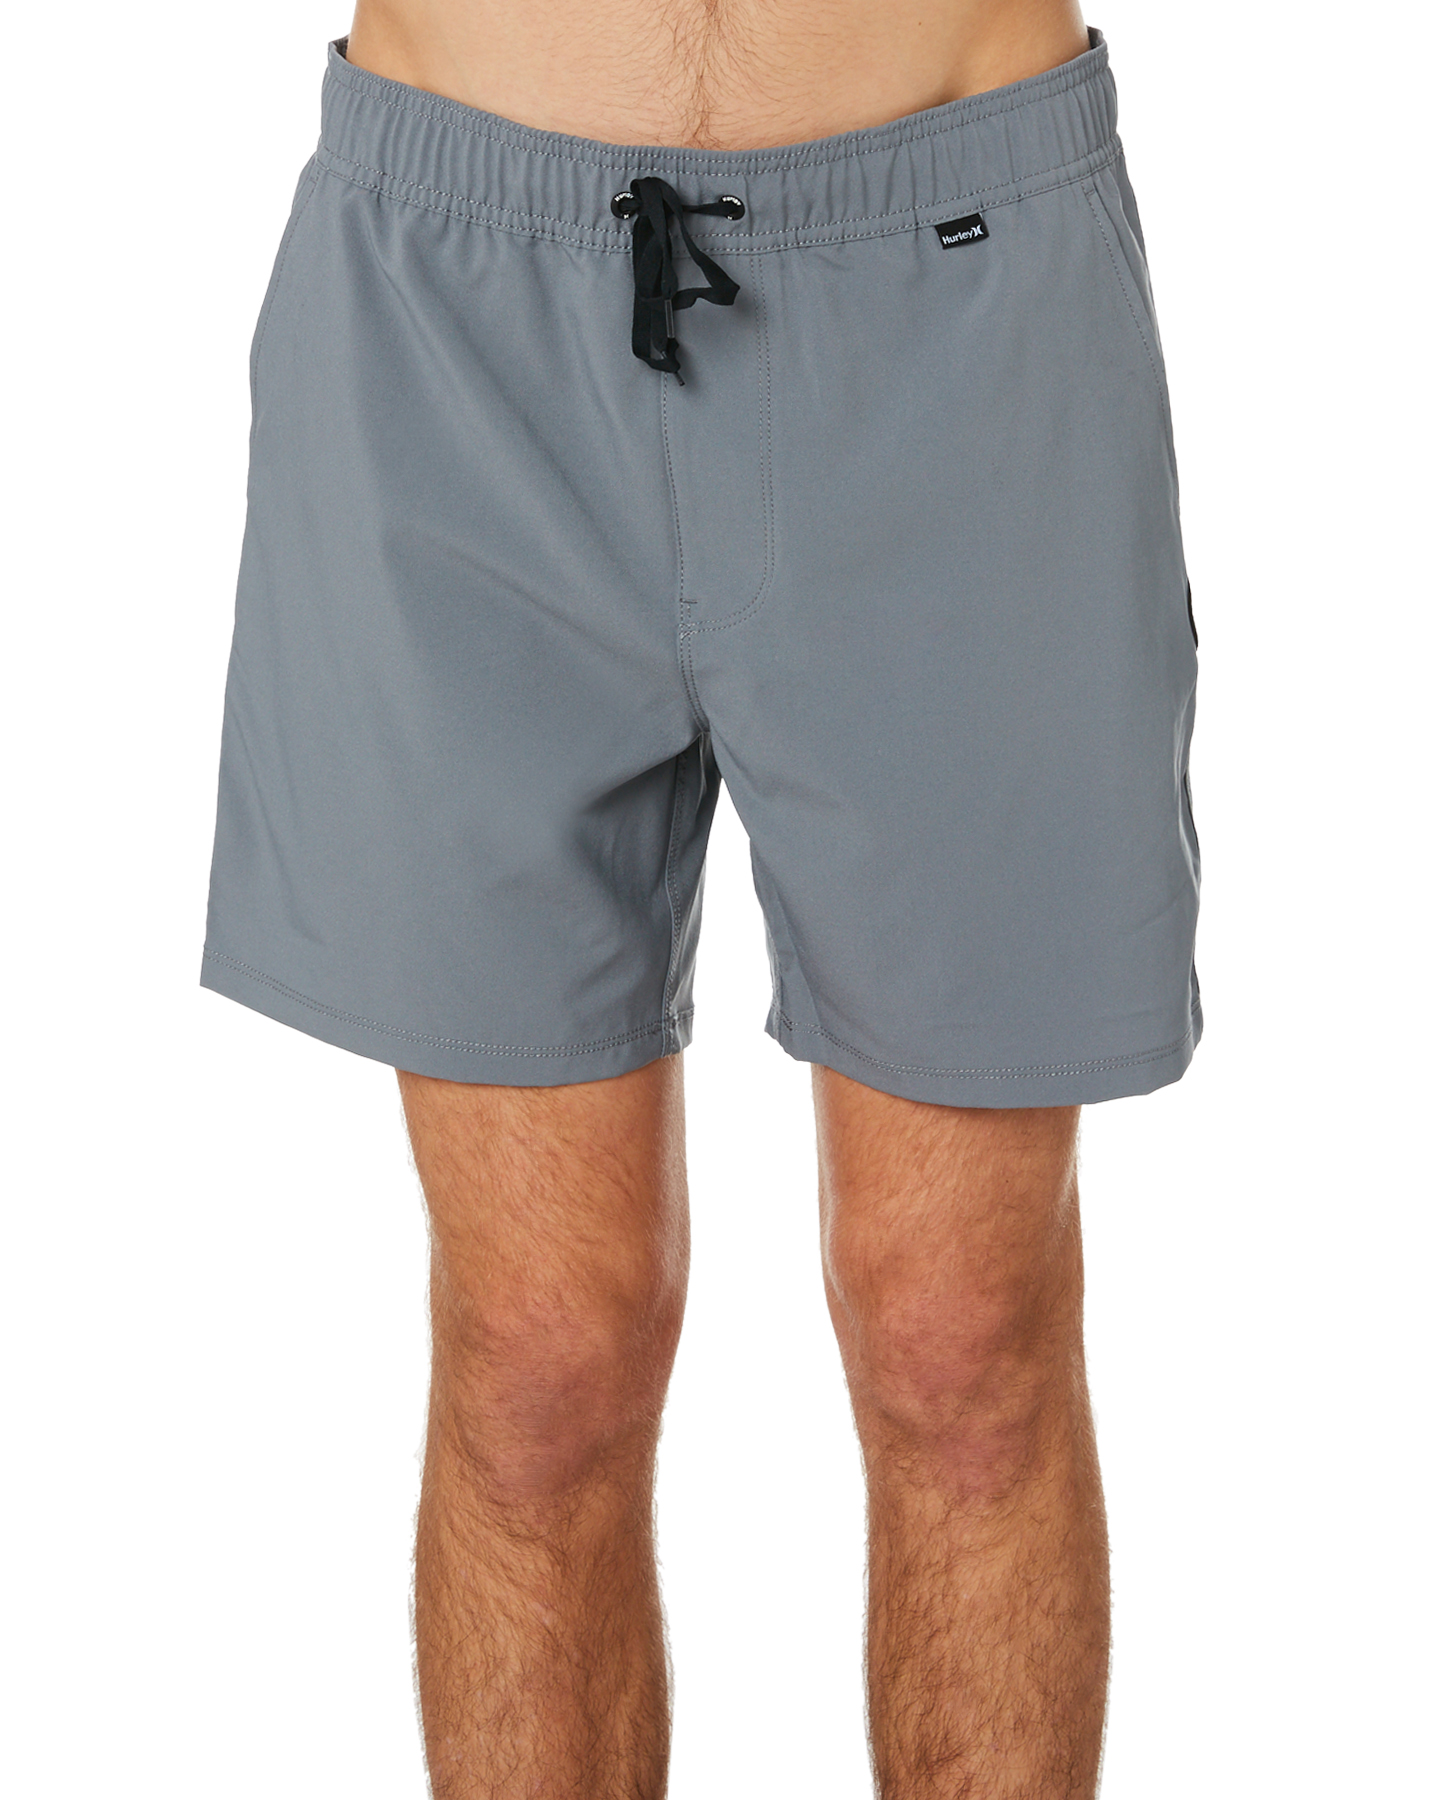 Hurley Oao Volley Mens Beach Short - Cool Grey | SurfStitch